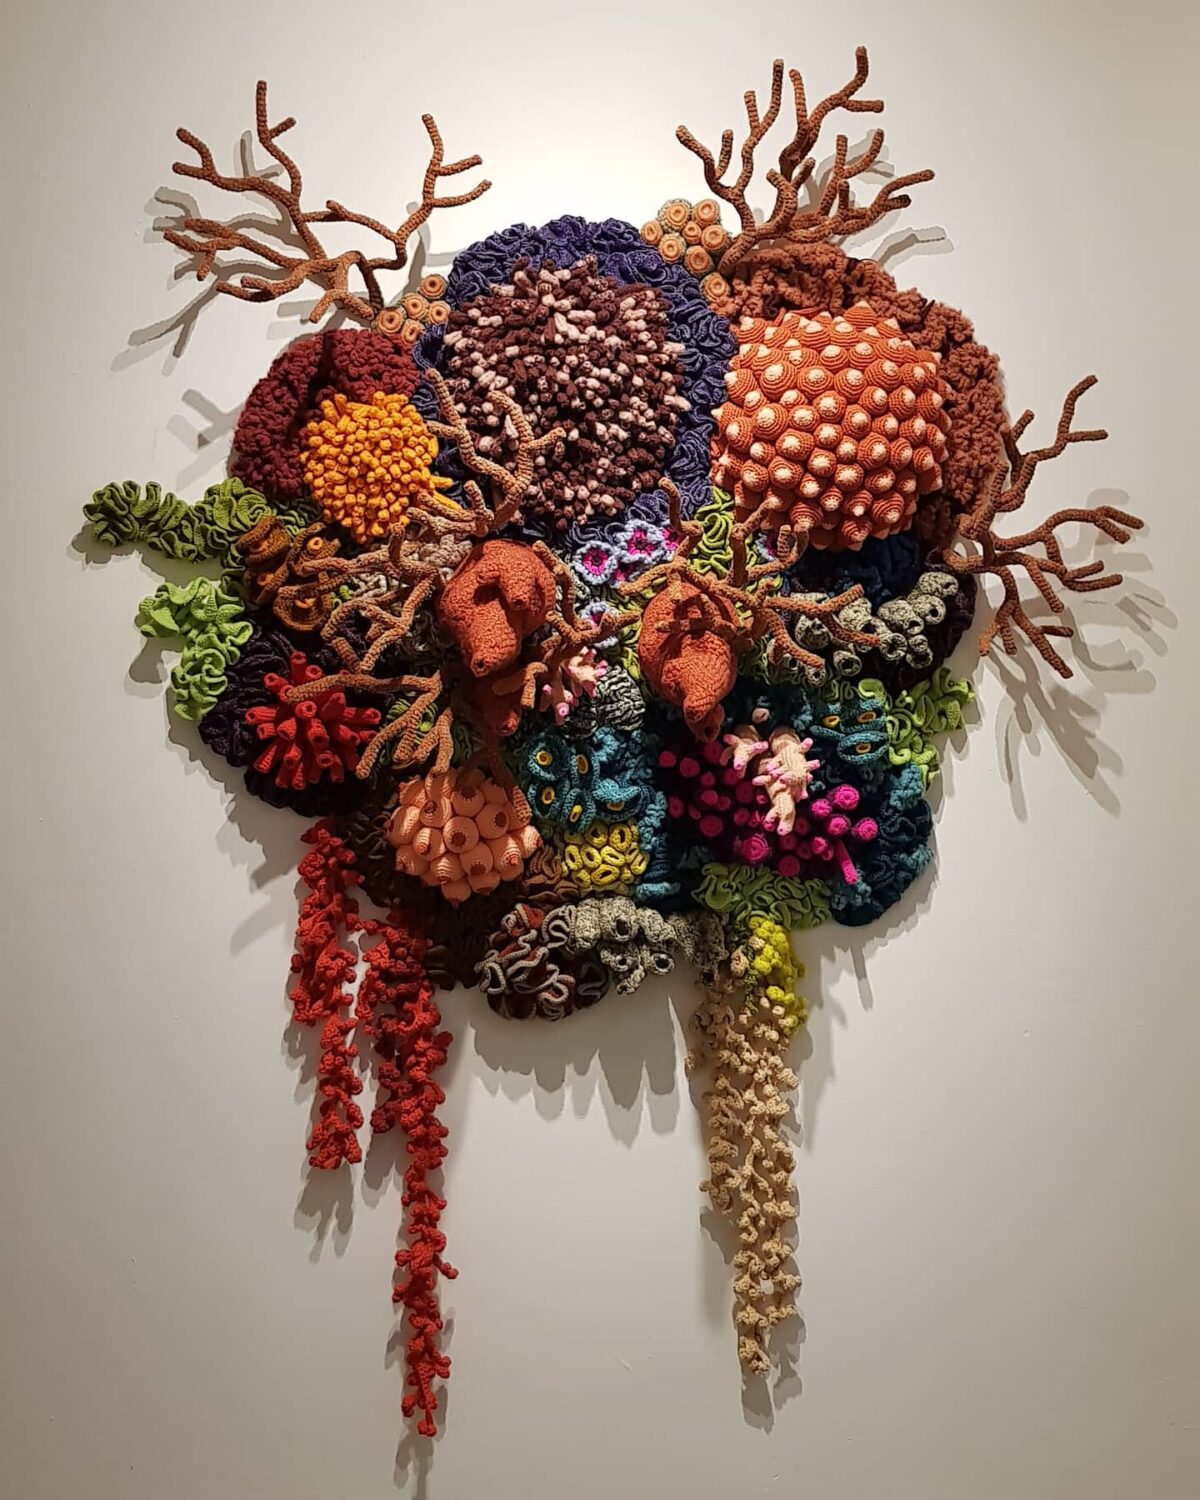 Fragile Ecologies Otherworldly Embroidered Coral Like Ecosystems By Mulyana 10